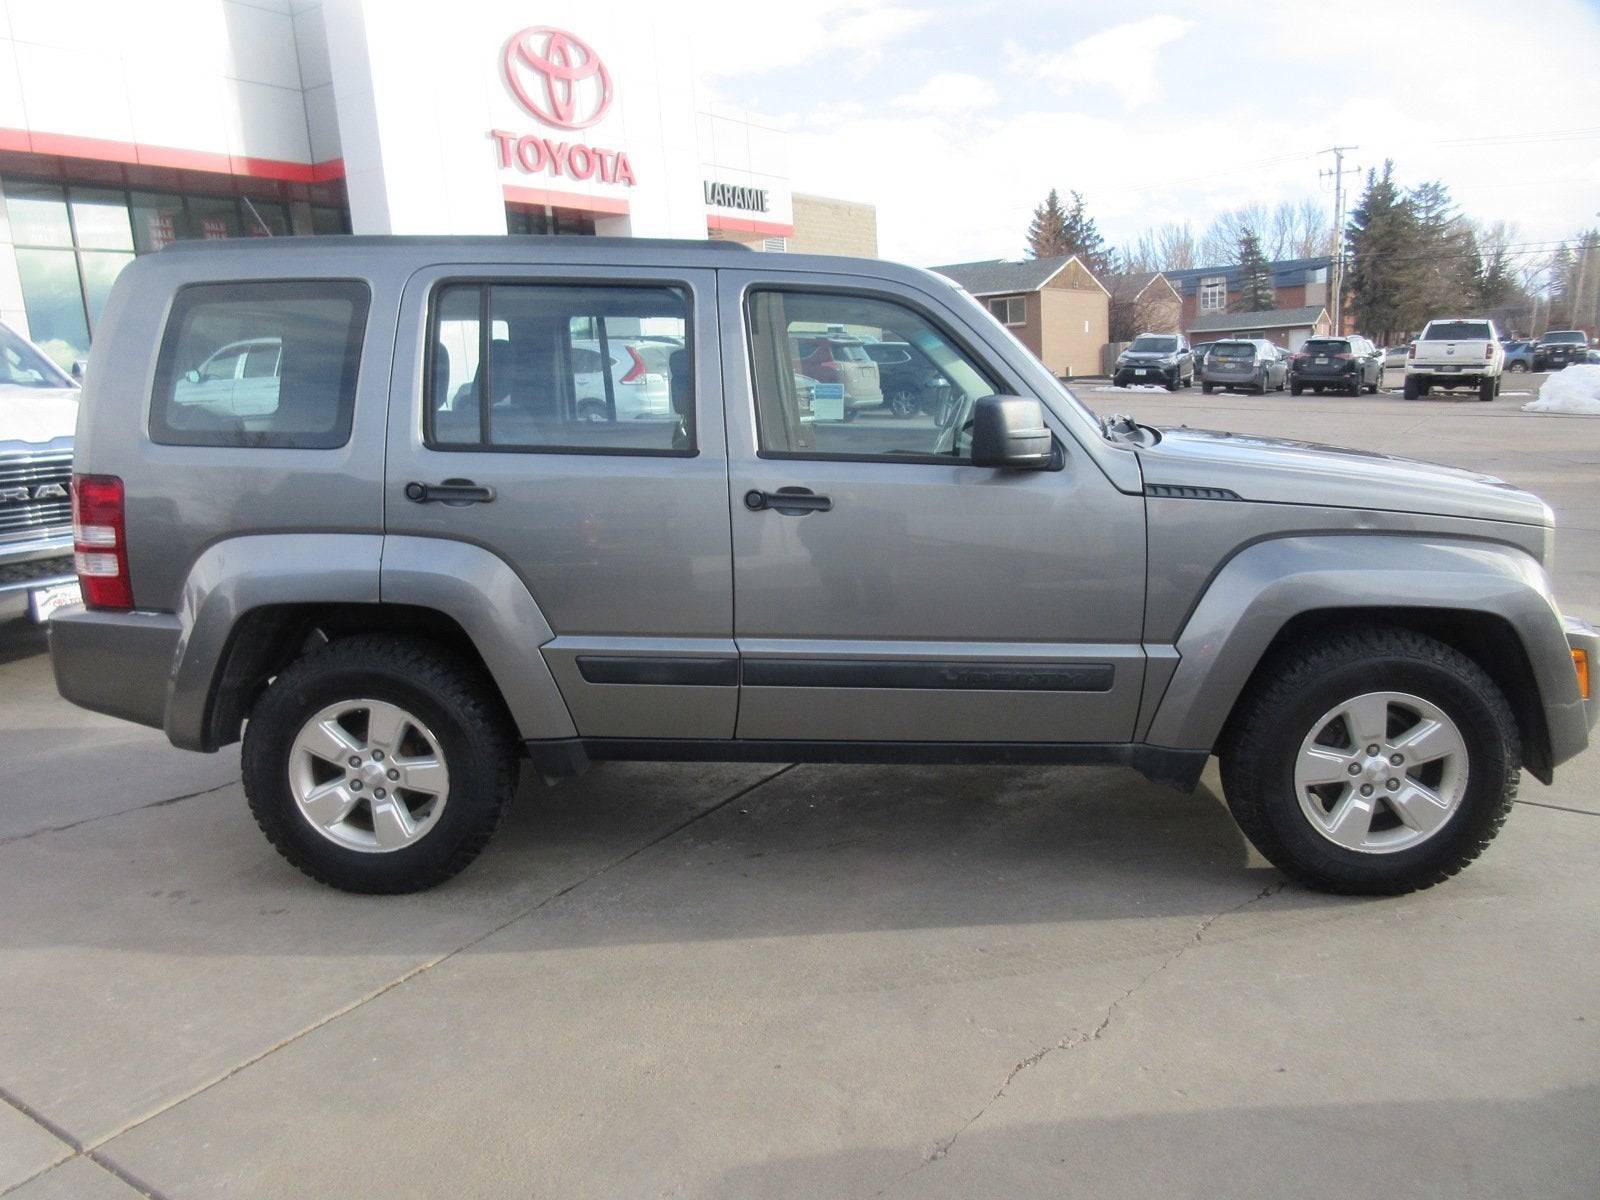 Used 2012 Jeep Liberty Sport with VIN 1C4PJMAK9CW209242 for sale in Laramie, WY